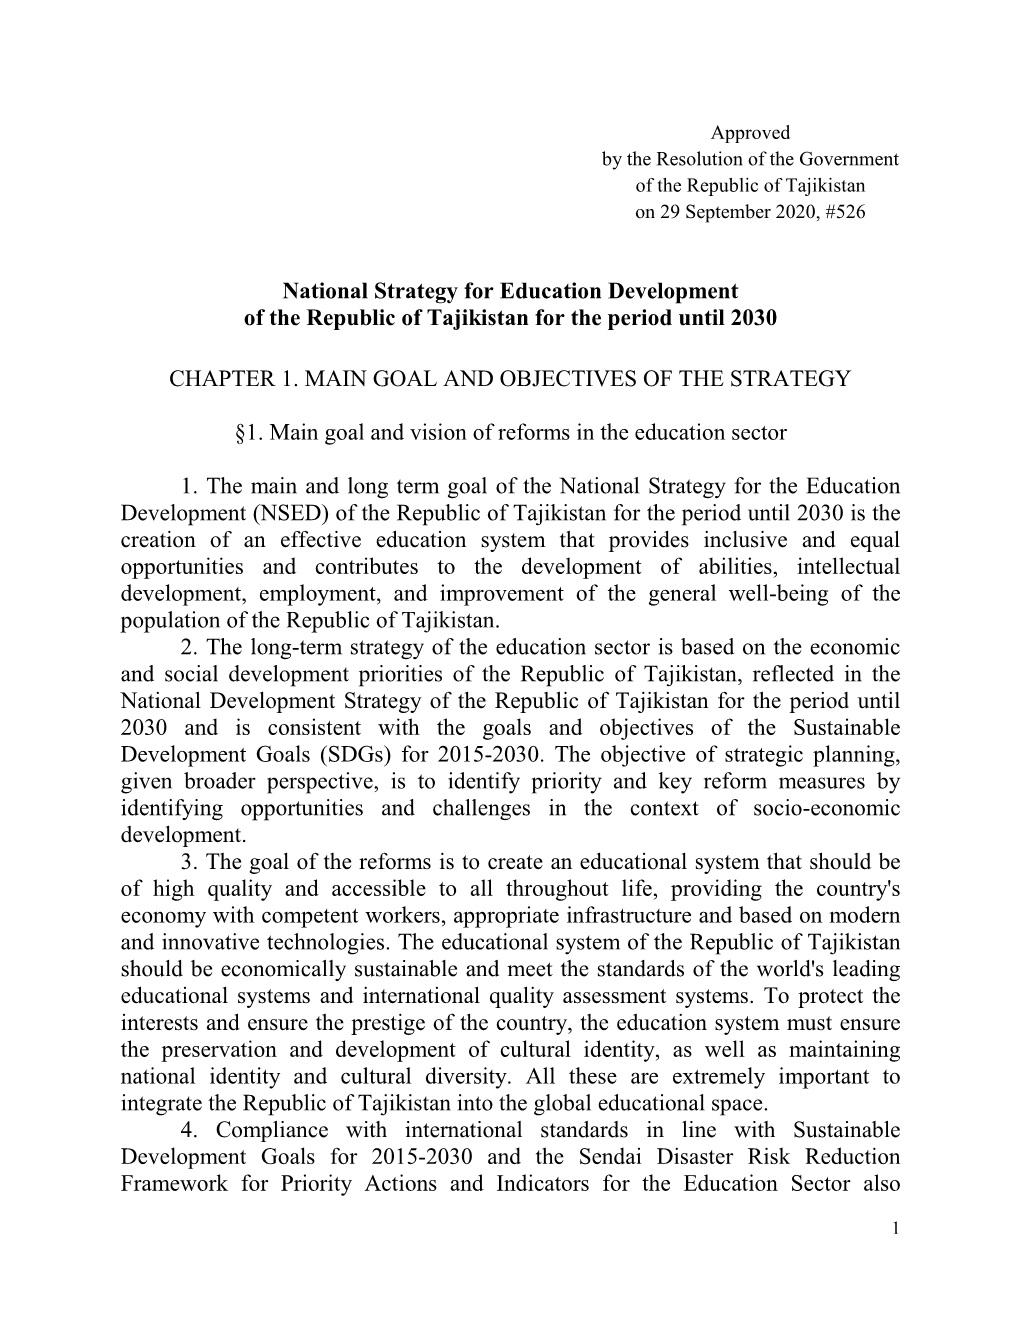 National Strategy for Education Development of the Republic of Tajikistan for the Period Until 2030 CHAPTER 1. MAIN GOAL AND